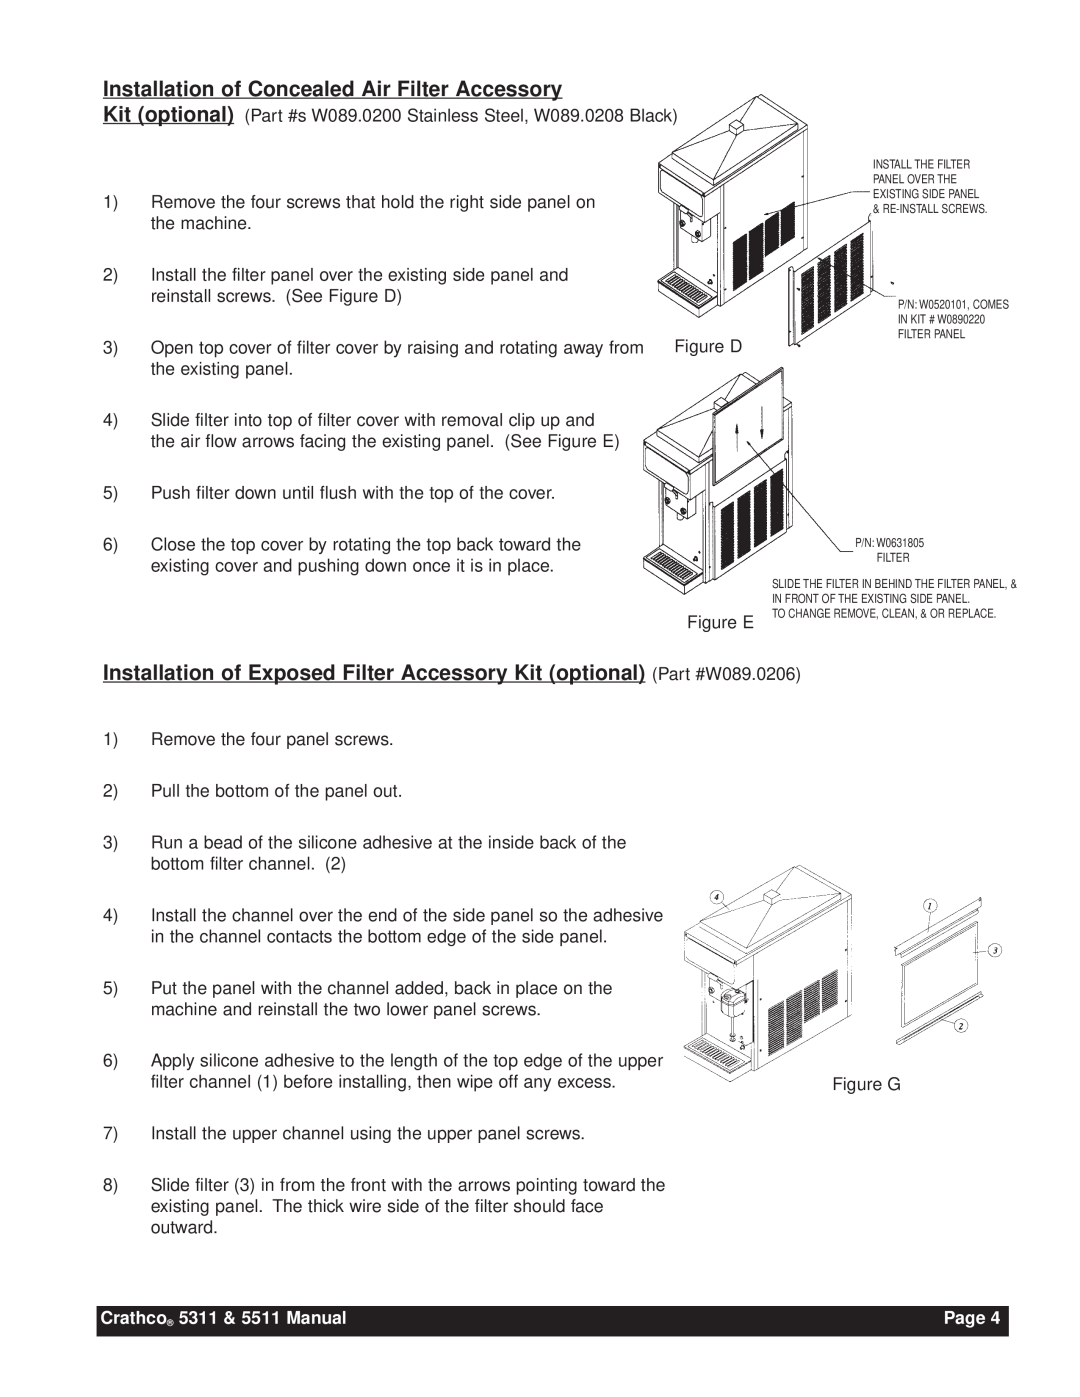 Grindmaster instruction manual Installation of Concealed Air Filter Accessory, Crathco 5311 & 5511 Manual, Page 